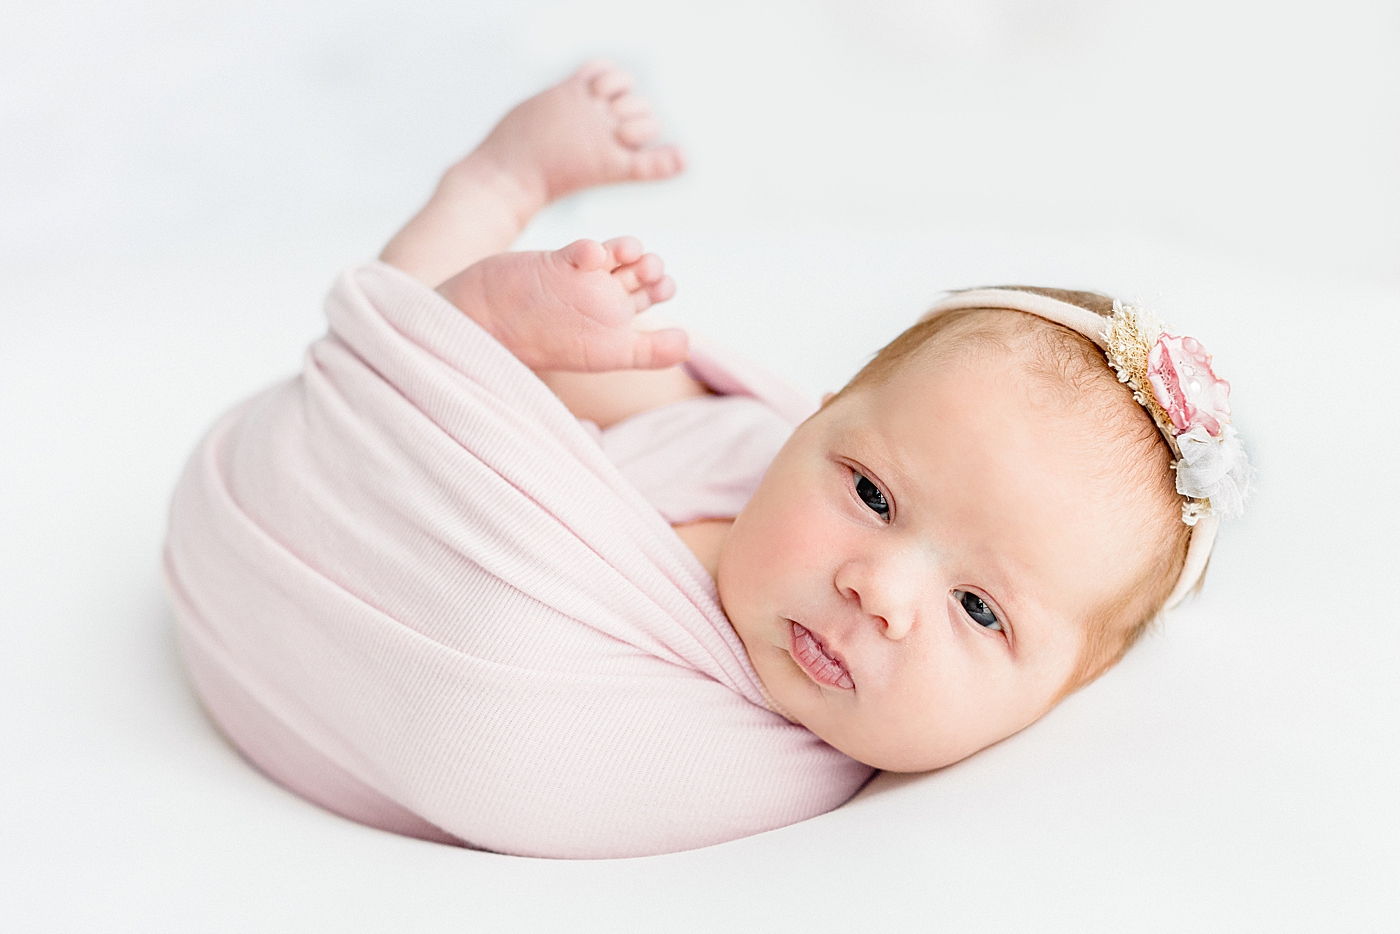 Baby girl in a pink swaddle during her One Year Milestone Collection | Image by Sana Ahmed Photography